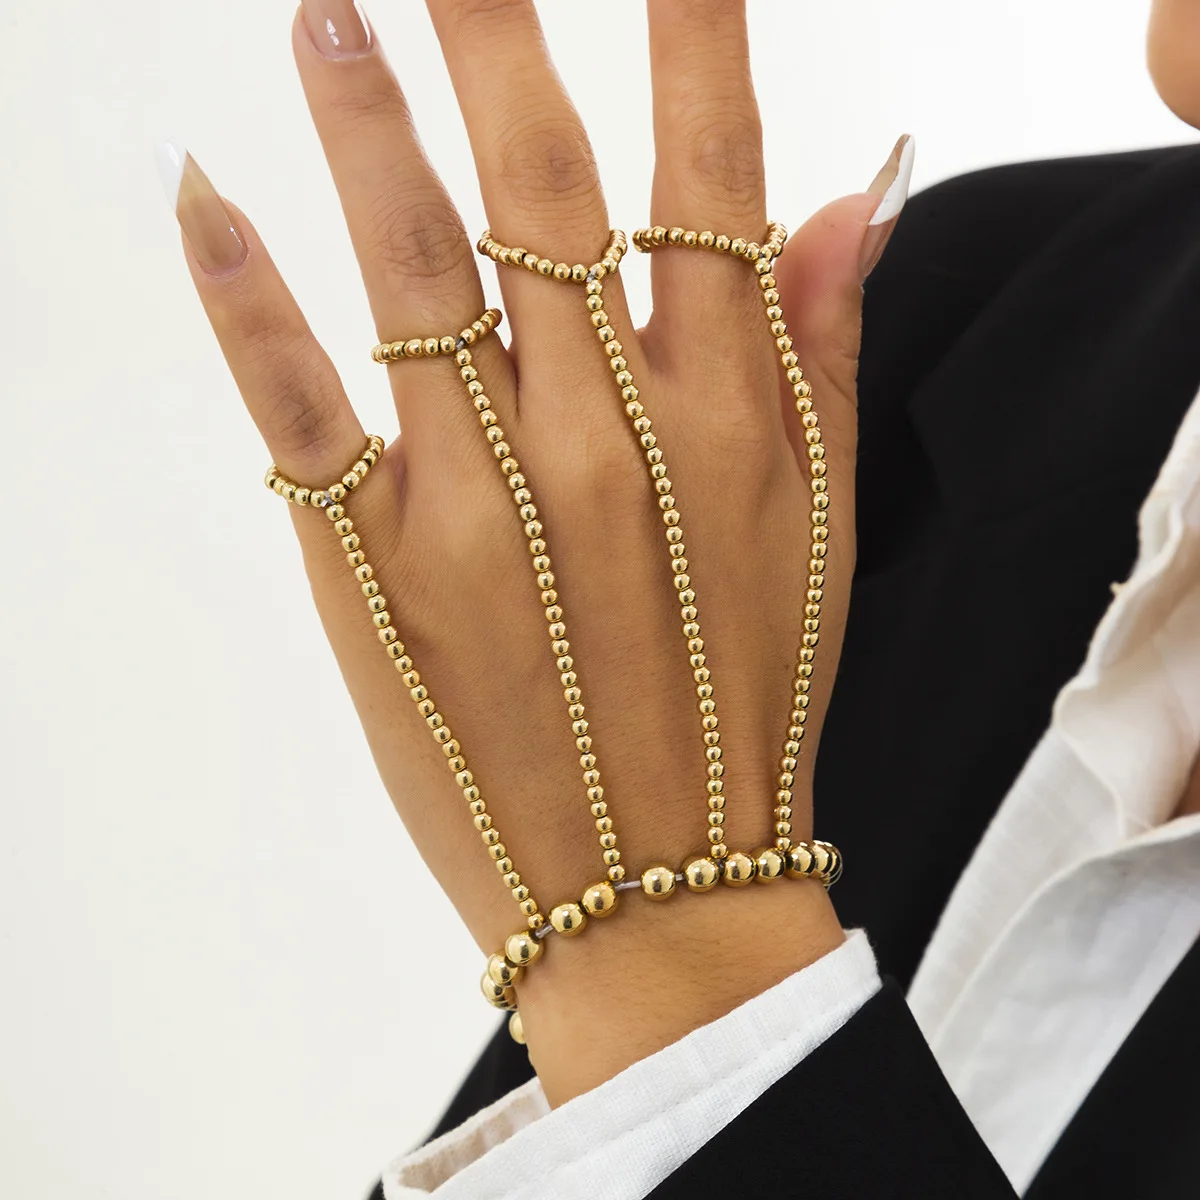 Boho Hand Harness Chain Jewelry Pearl Link Chain Connected Finger Ring  Bracelets for Women Charm Friendship